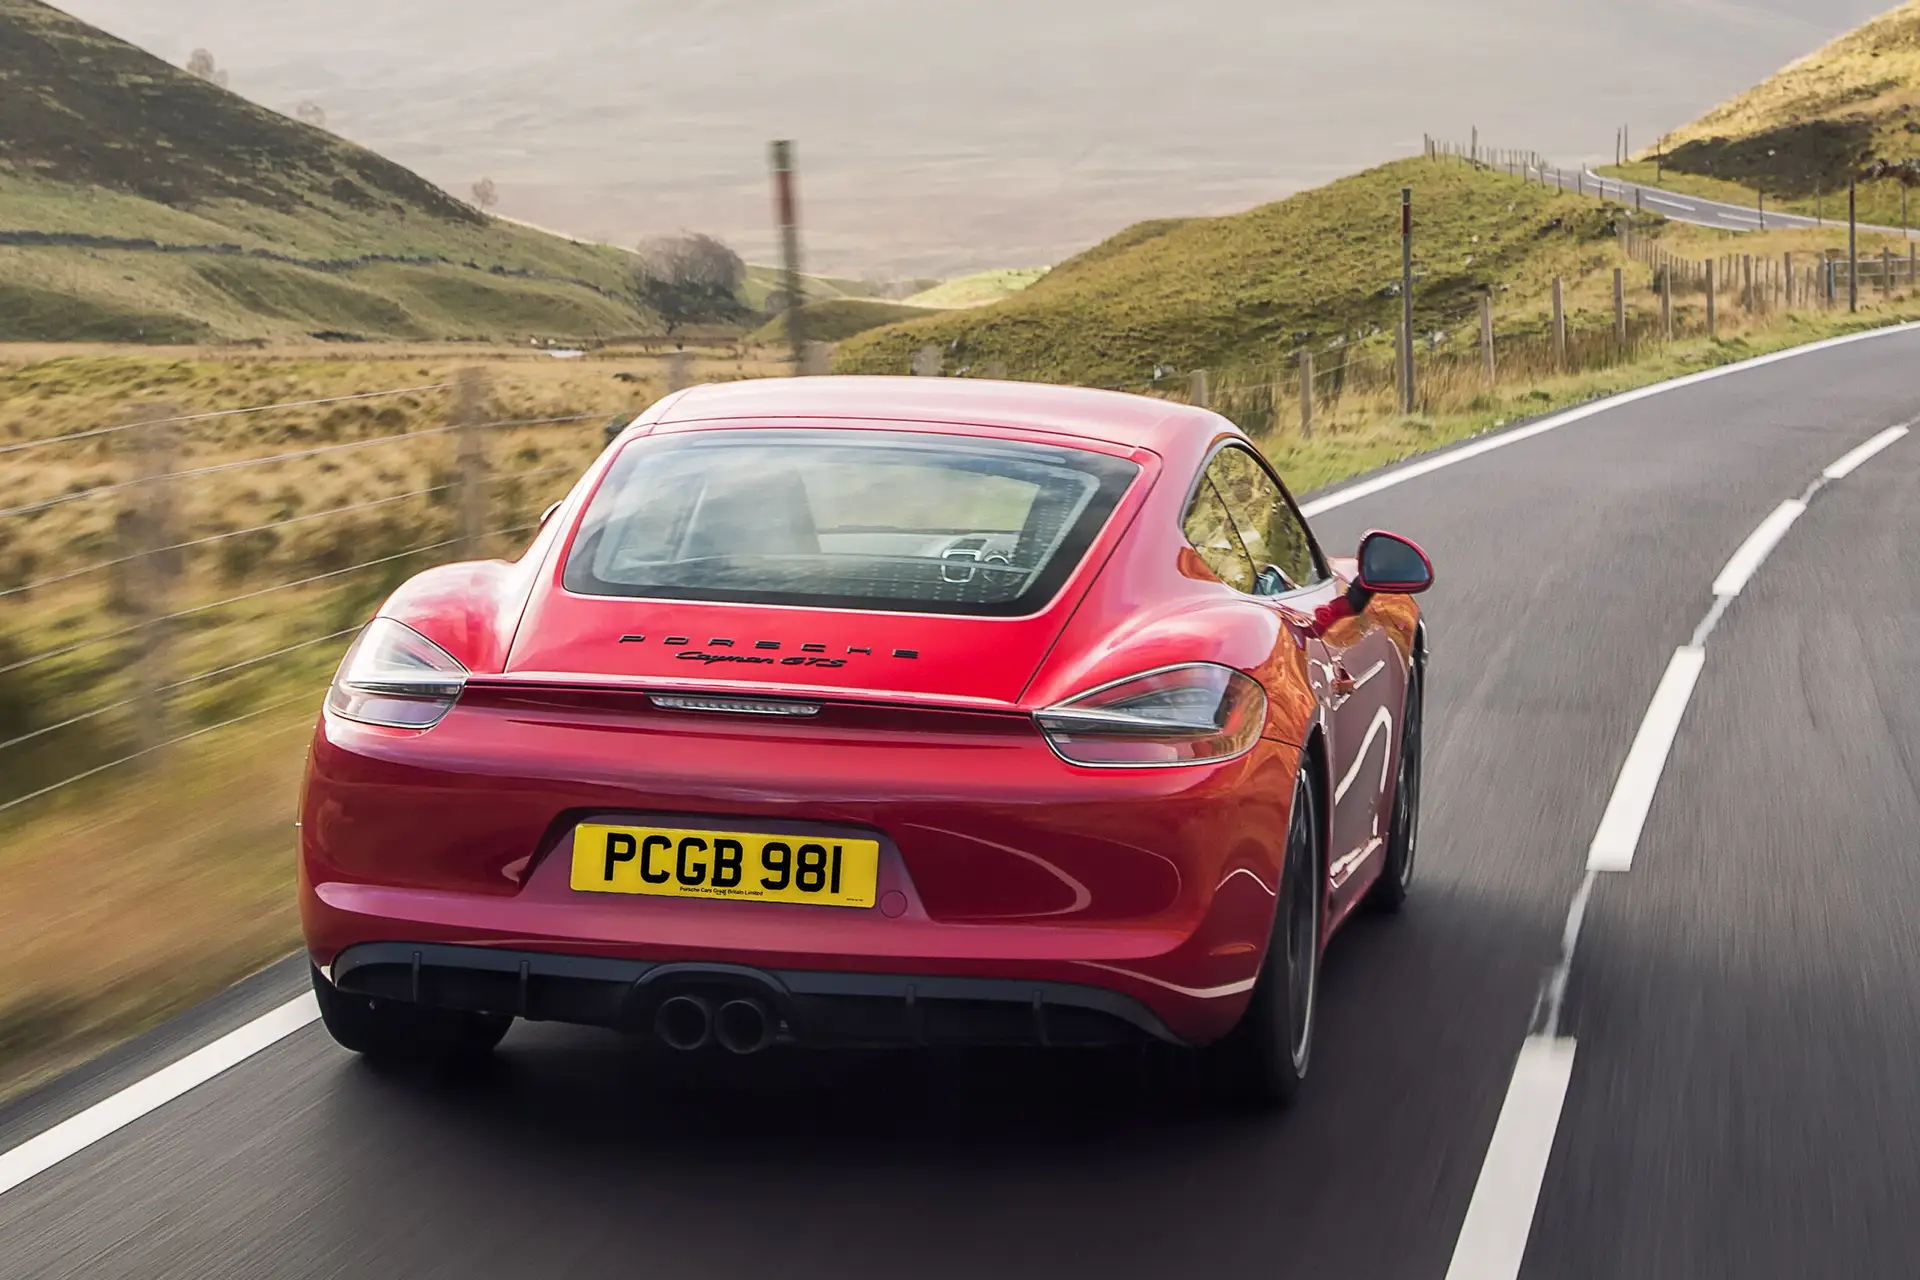 Used Porsche Cayman (2013-2016) Review rear